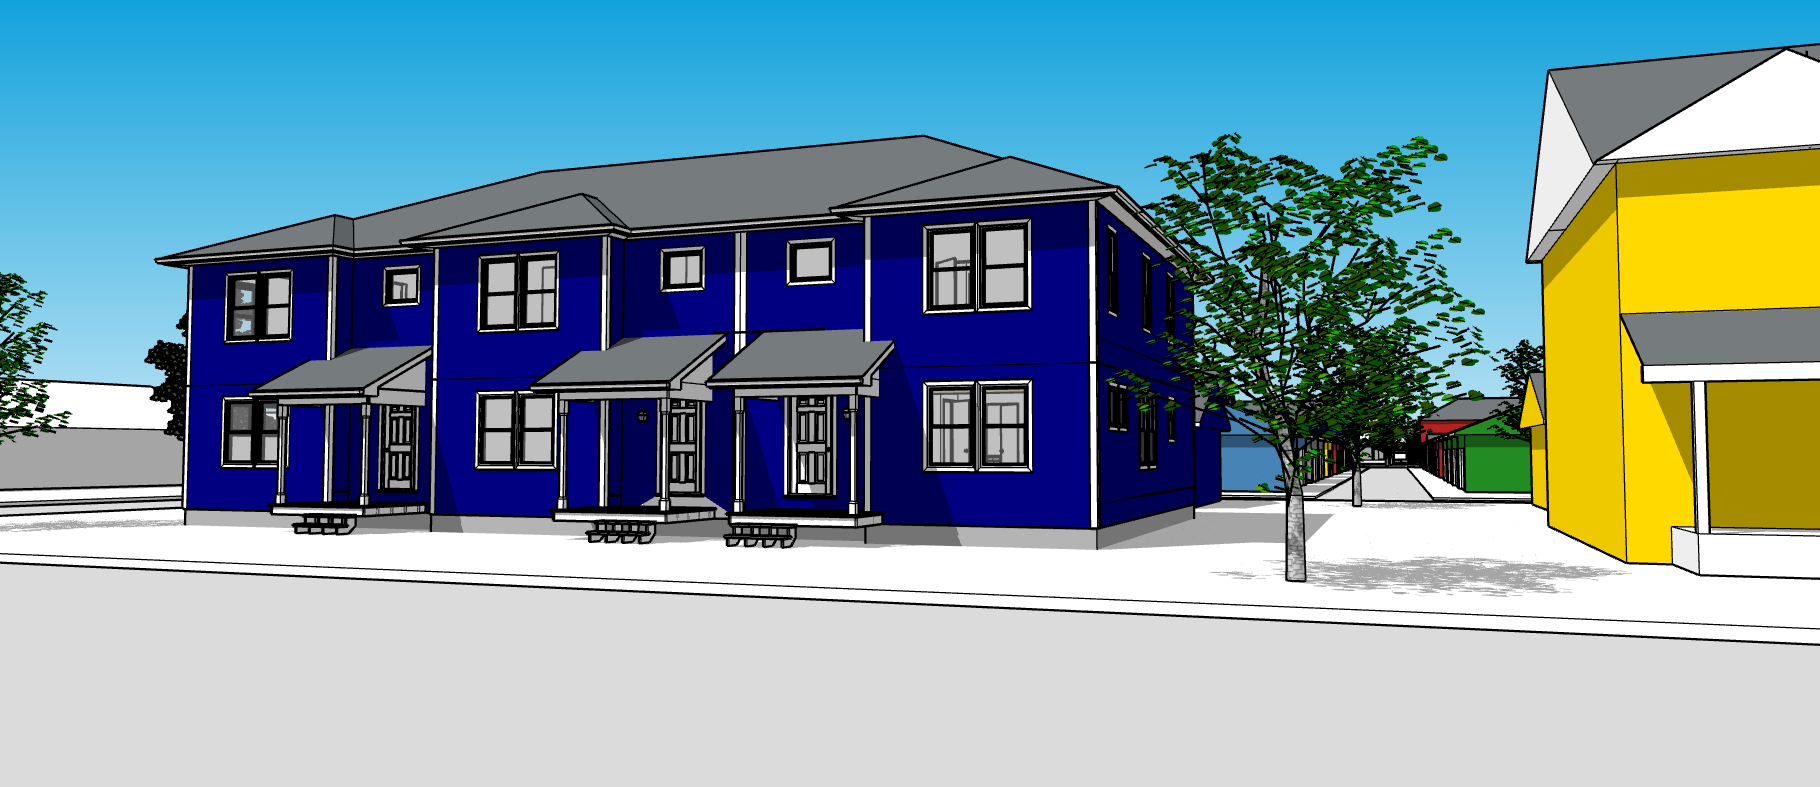 Blue rendering of a potential twin home in The Heights.